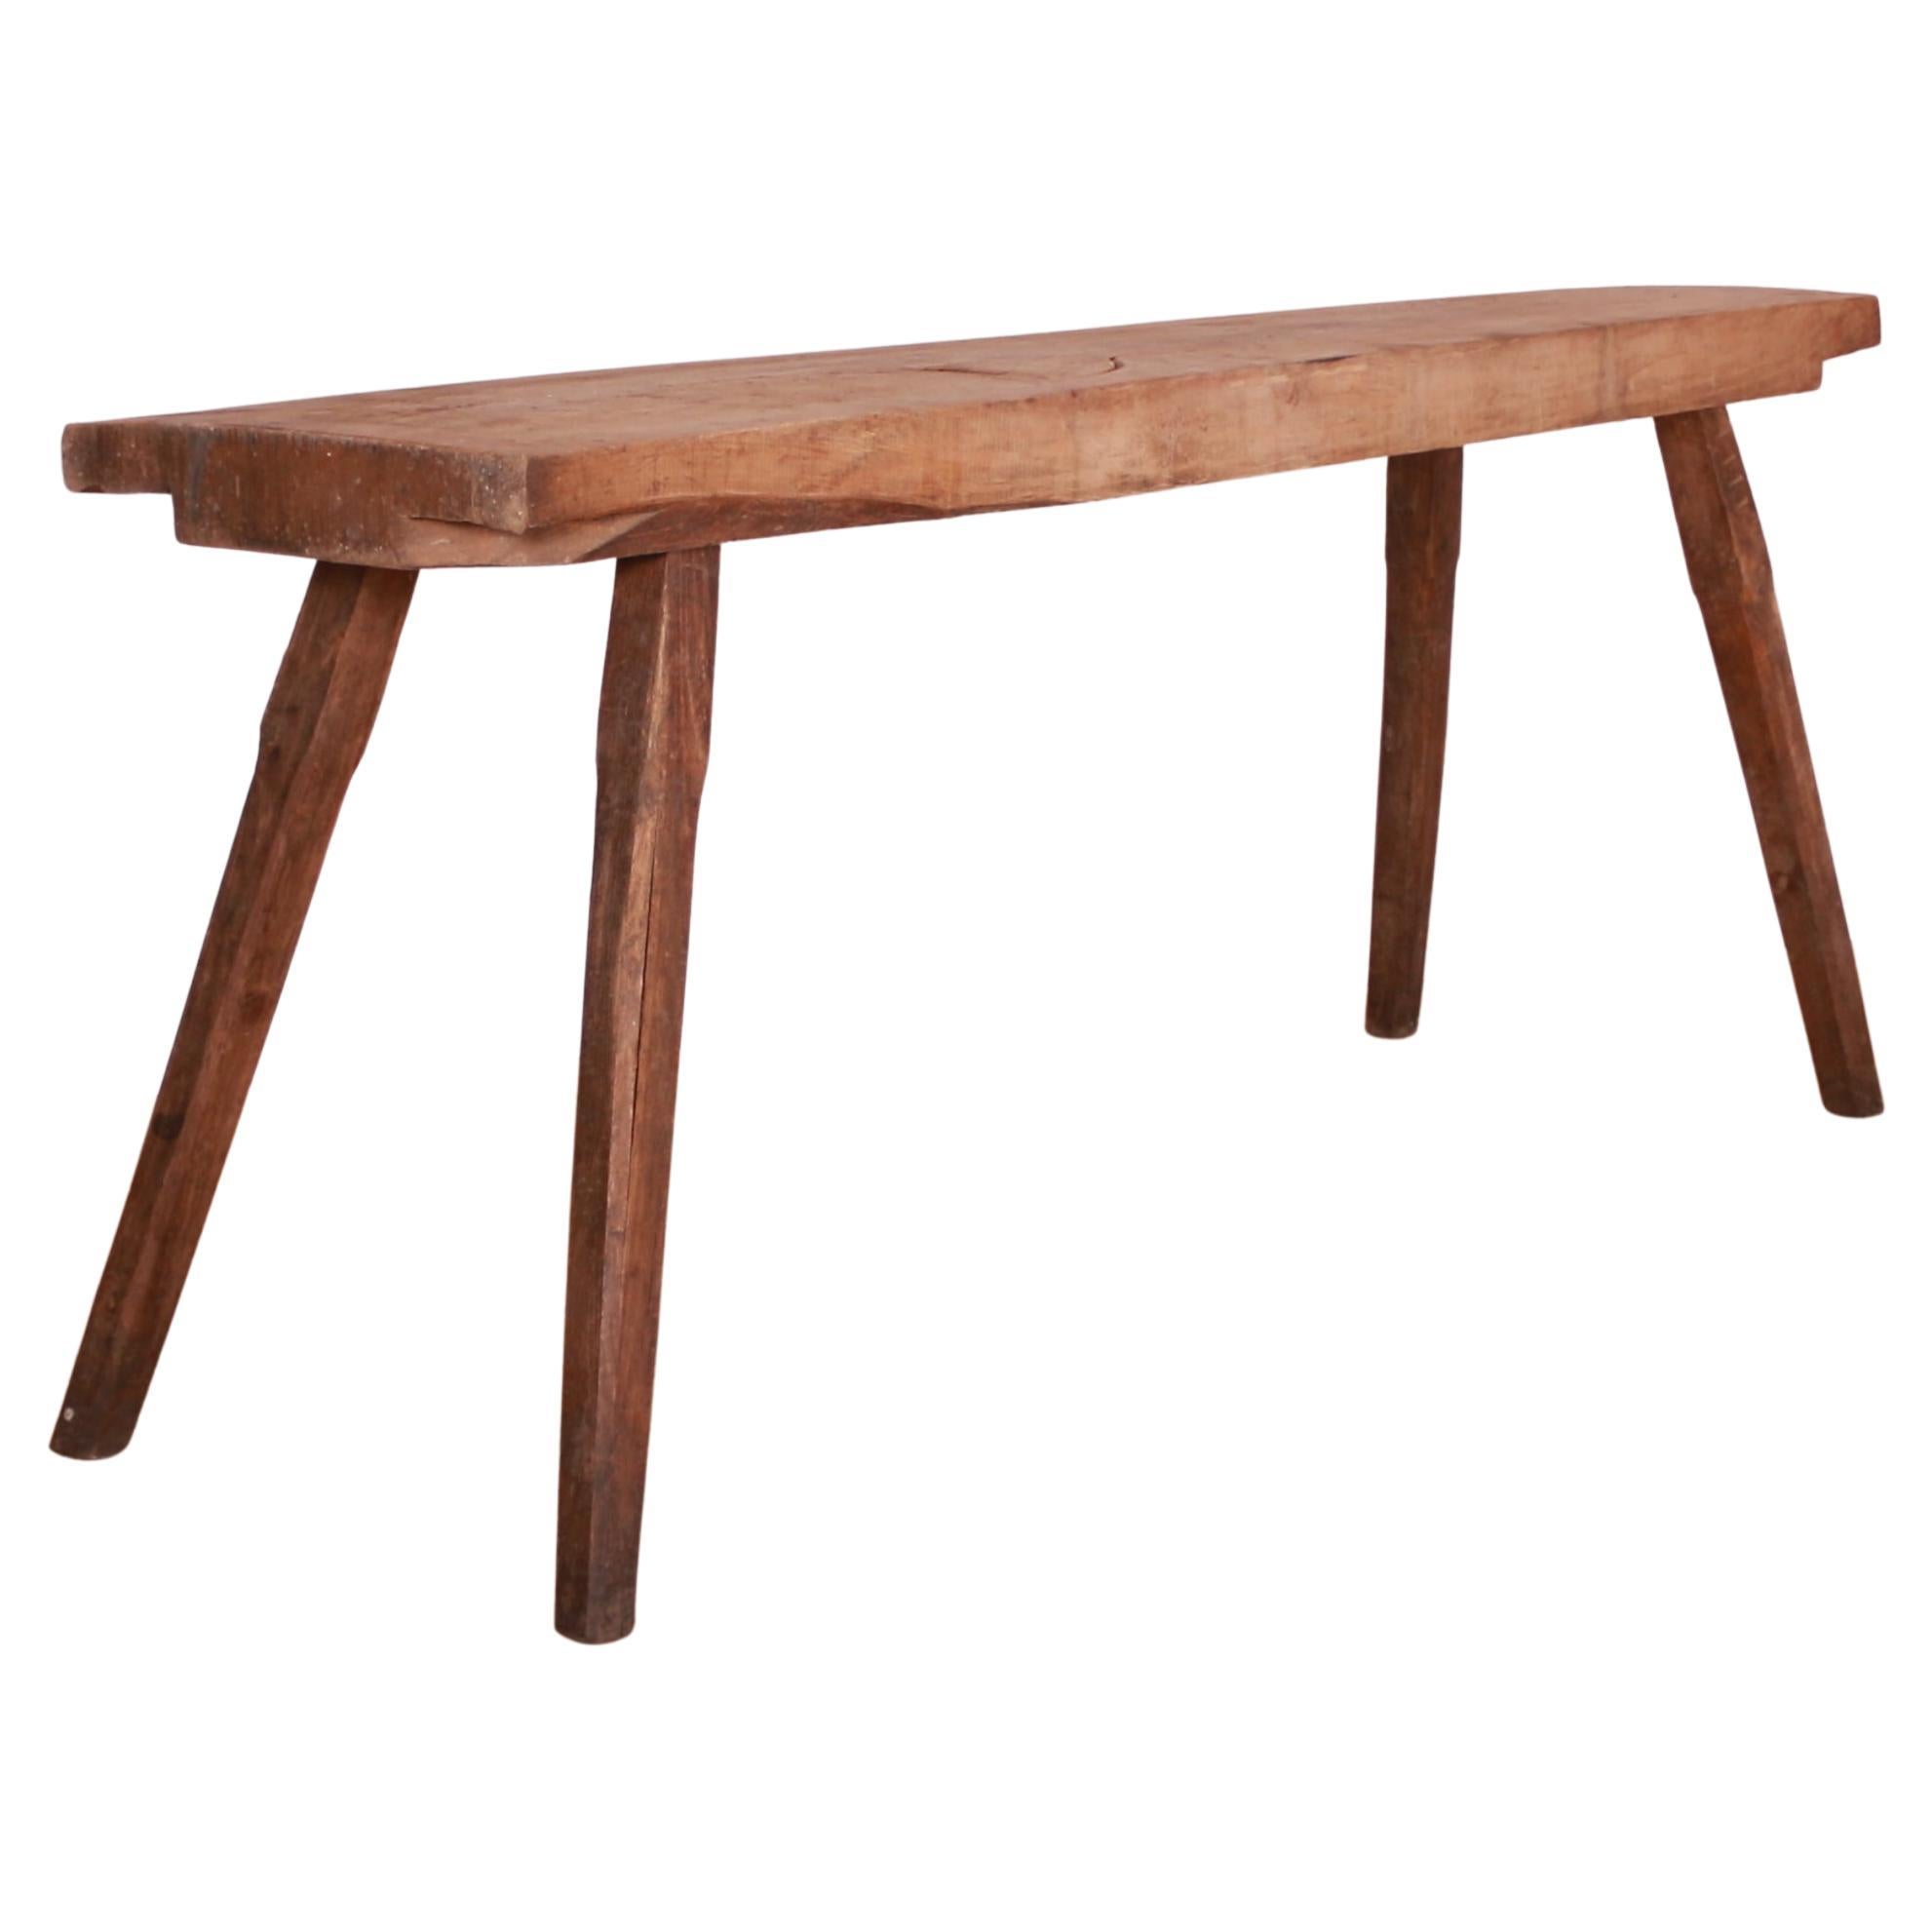 French Sycamore and Elm Trestle Table